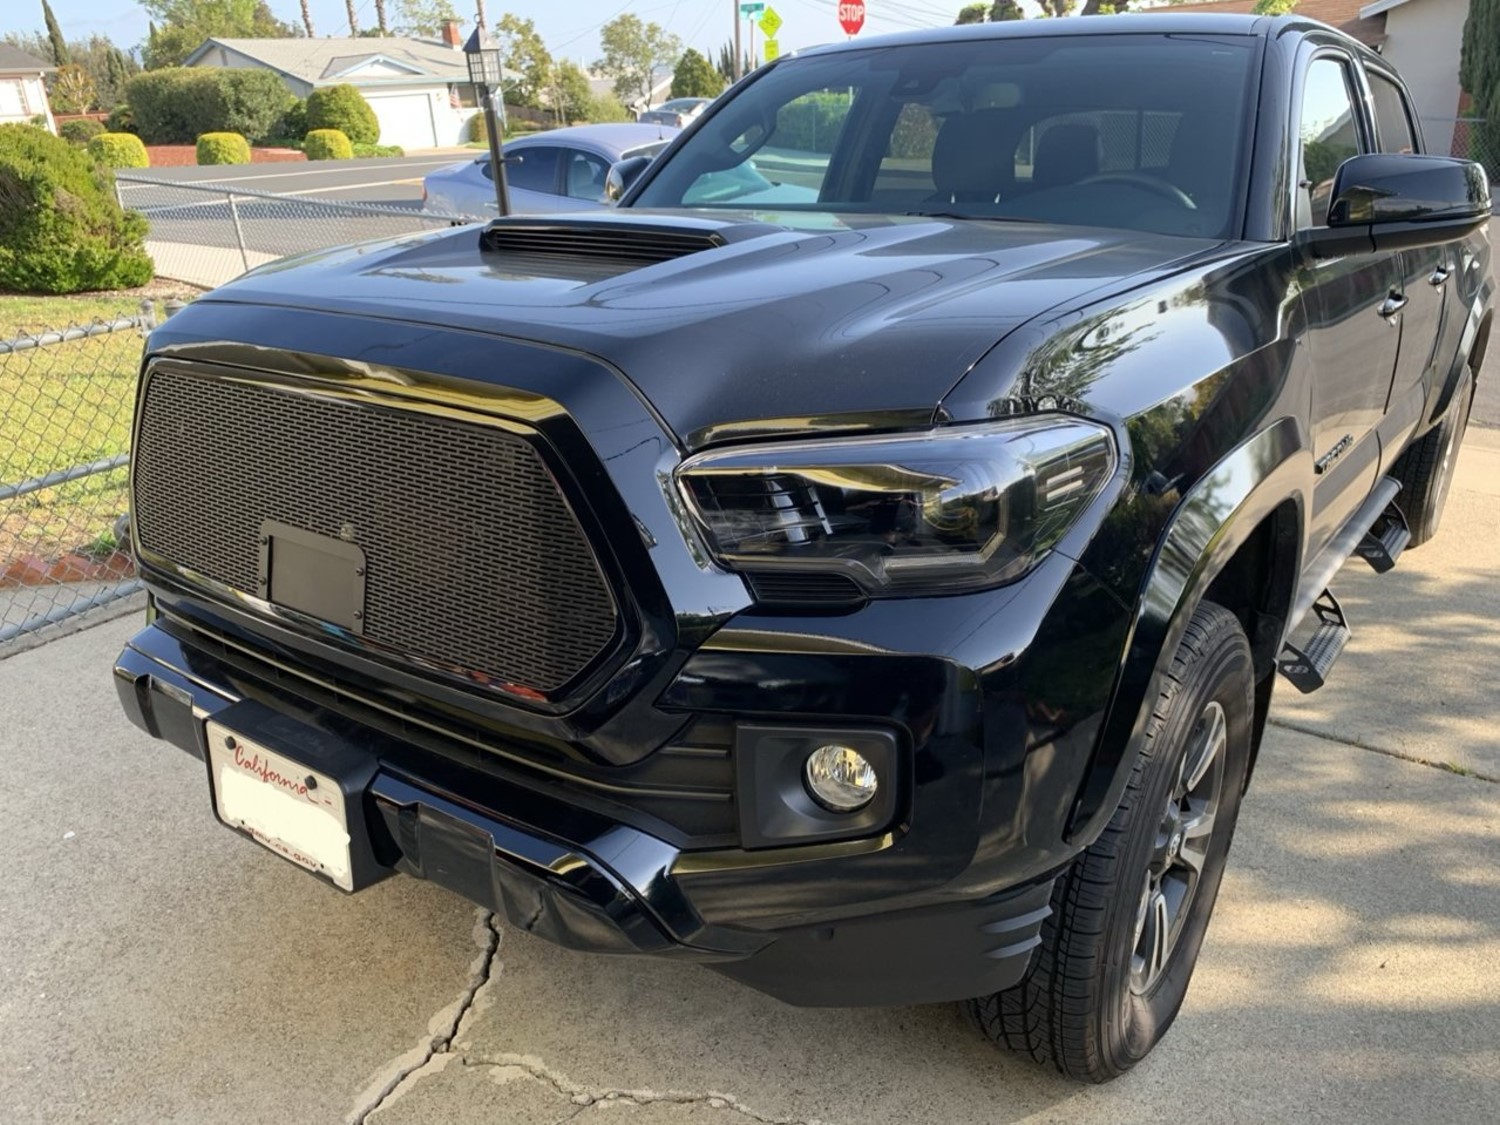 2018 - 2021 Toyota Tacoma Mesh Grill & Bezels by customcargrills